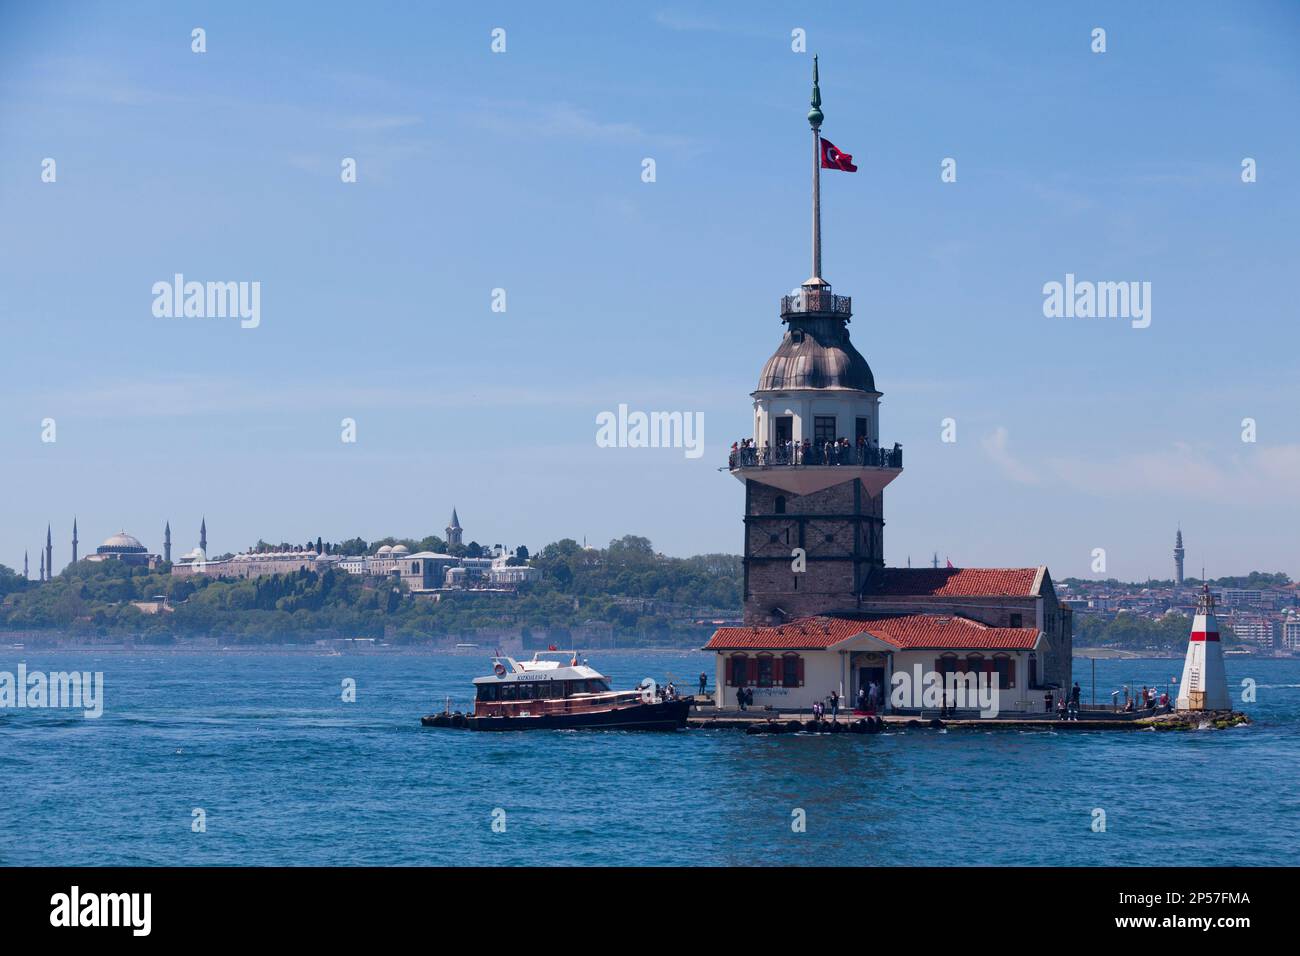 Istanbul, Turkey - May 12 2019: The Maiden's Tower, also known as Leander's Tower since the medieval Byzantine period. Stock Photo